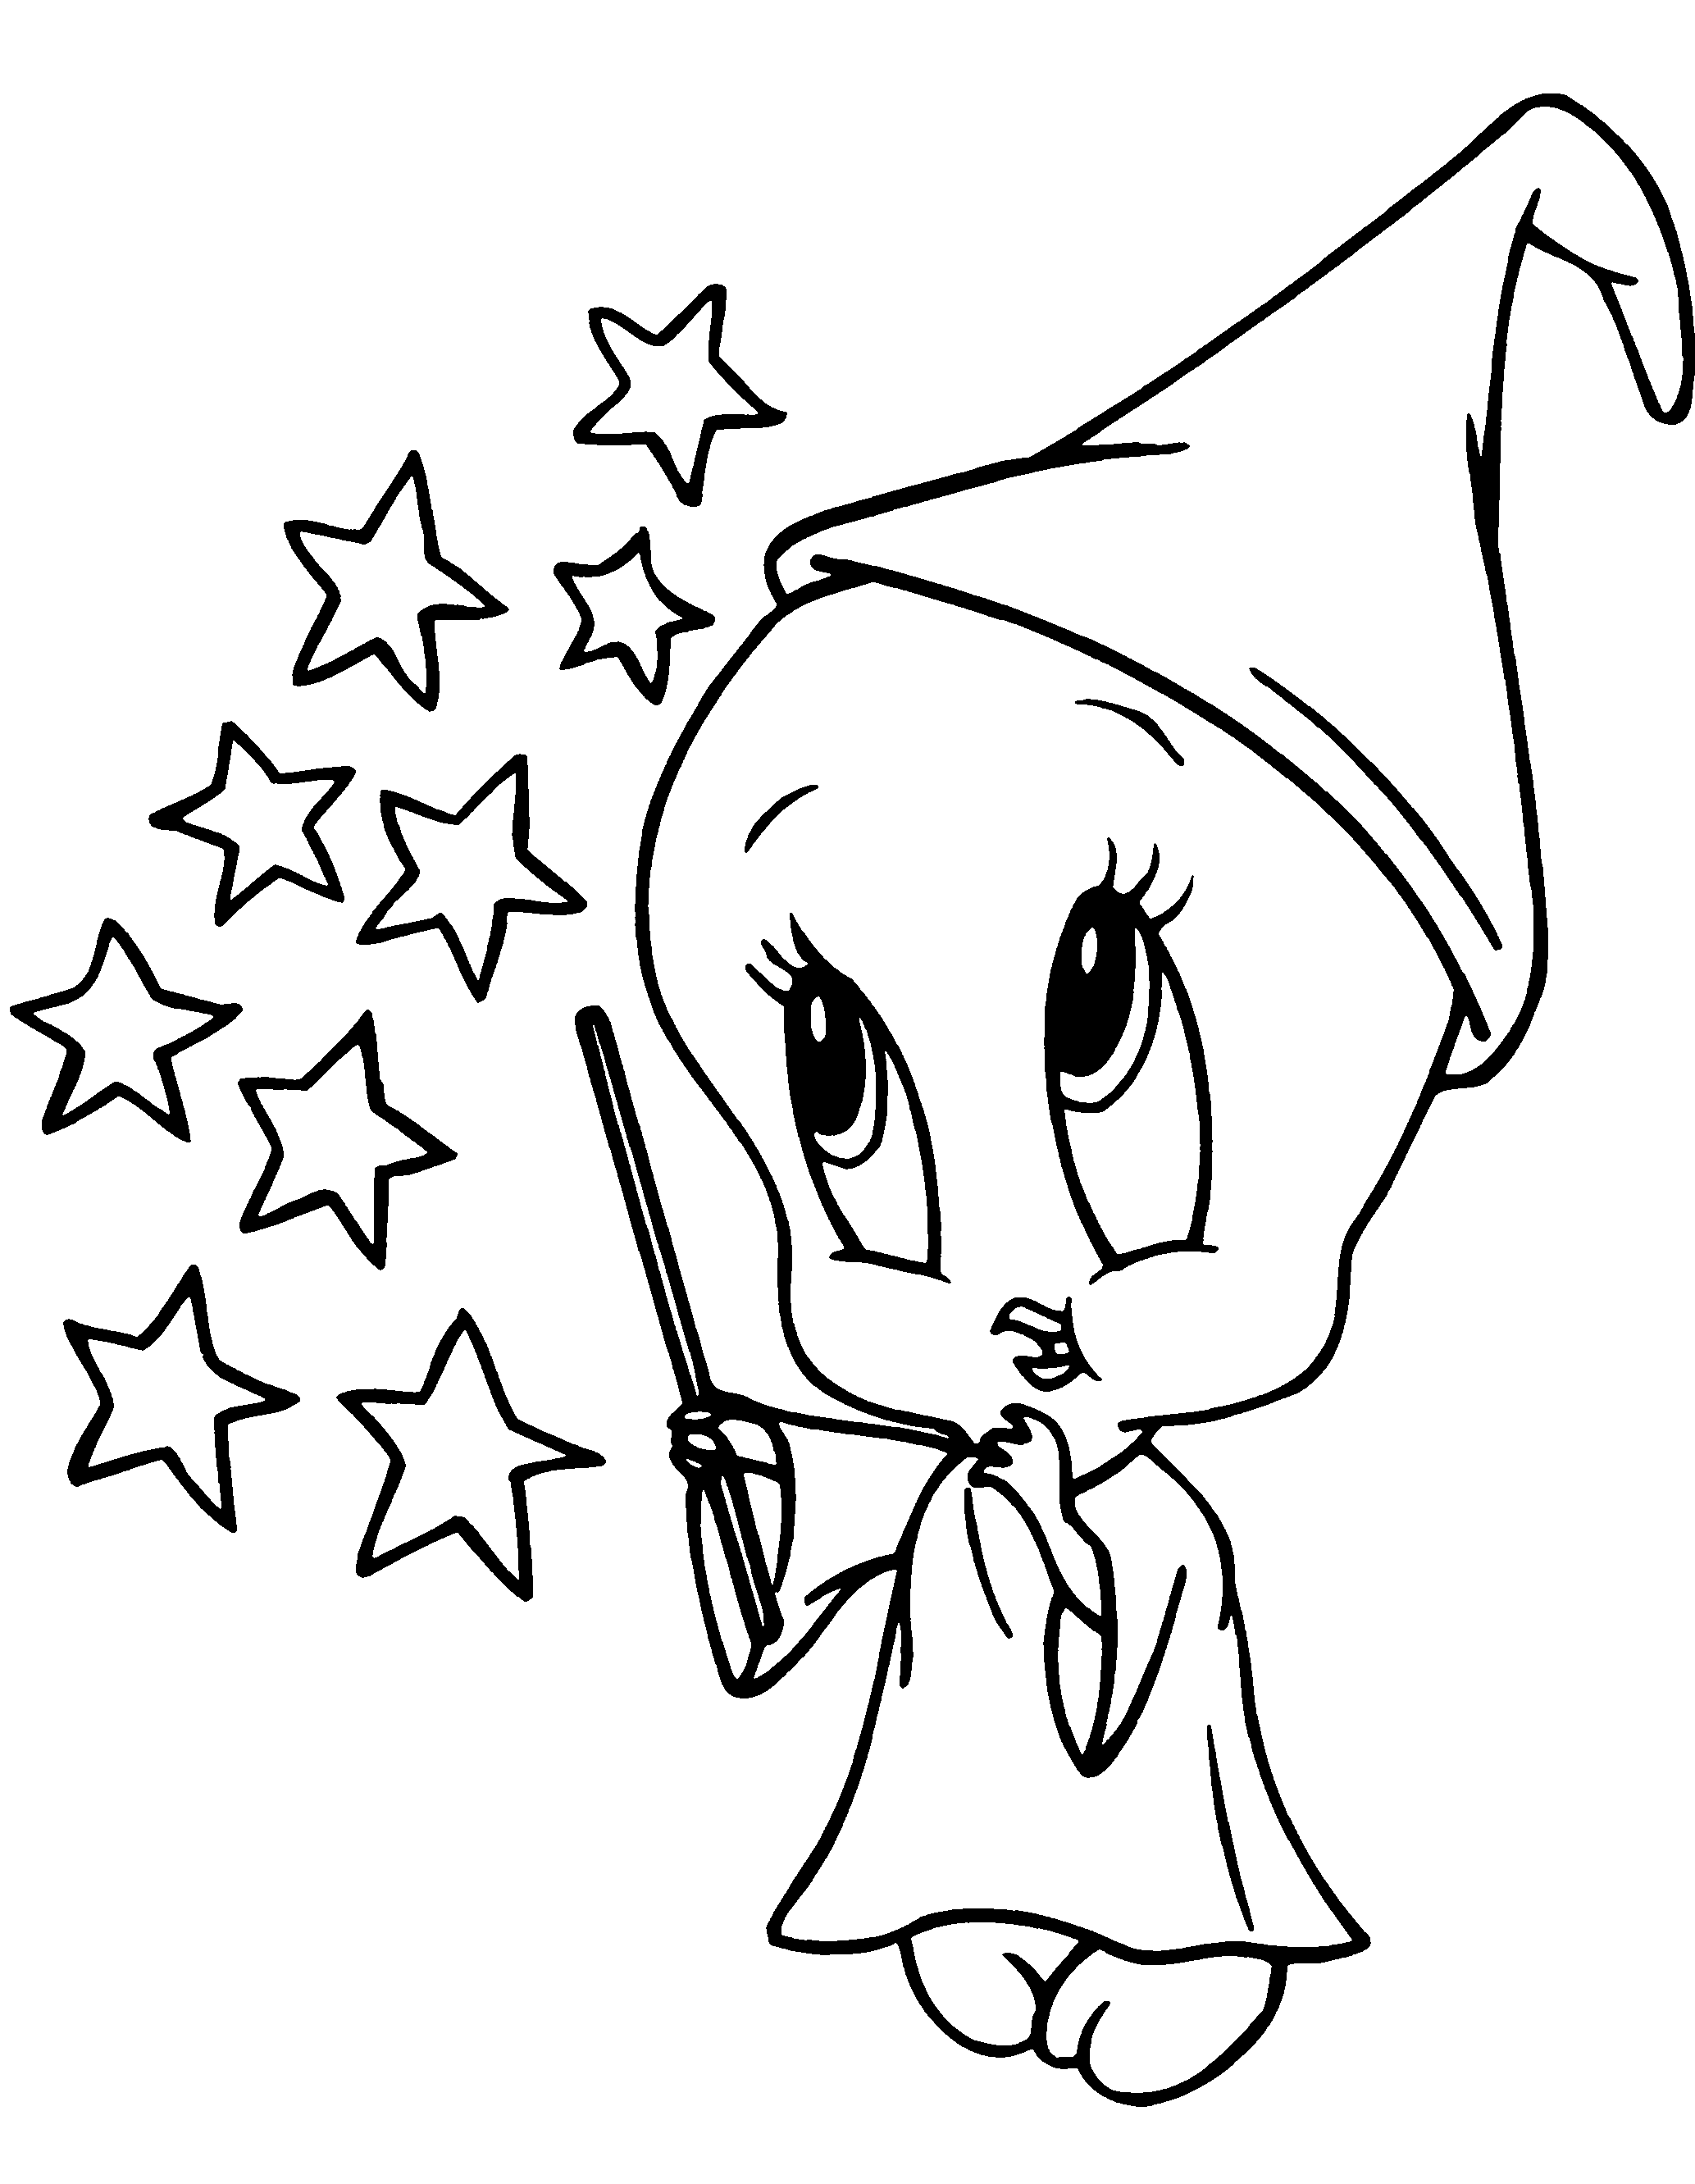 Baby tweety witch coloring page crafts and worksheets for preschooltoddler and kindergarten